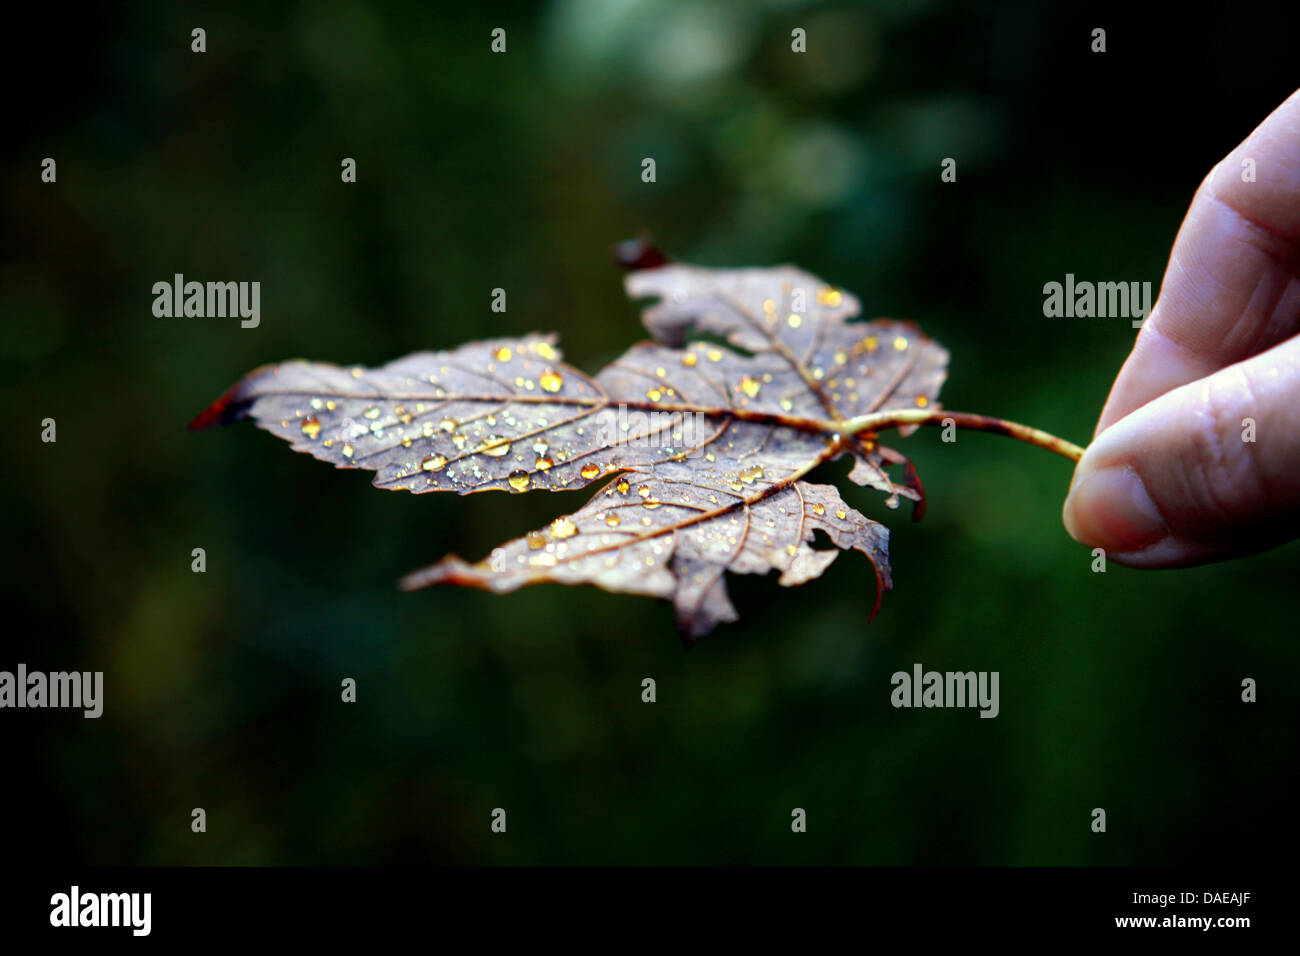 sycamore maple, great maple (Acer pseudoplatanus), gold-coloured dewdrops on a maple leaf, Germany, Bavaria Stock Photo